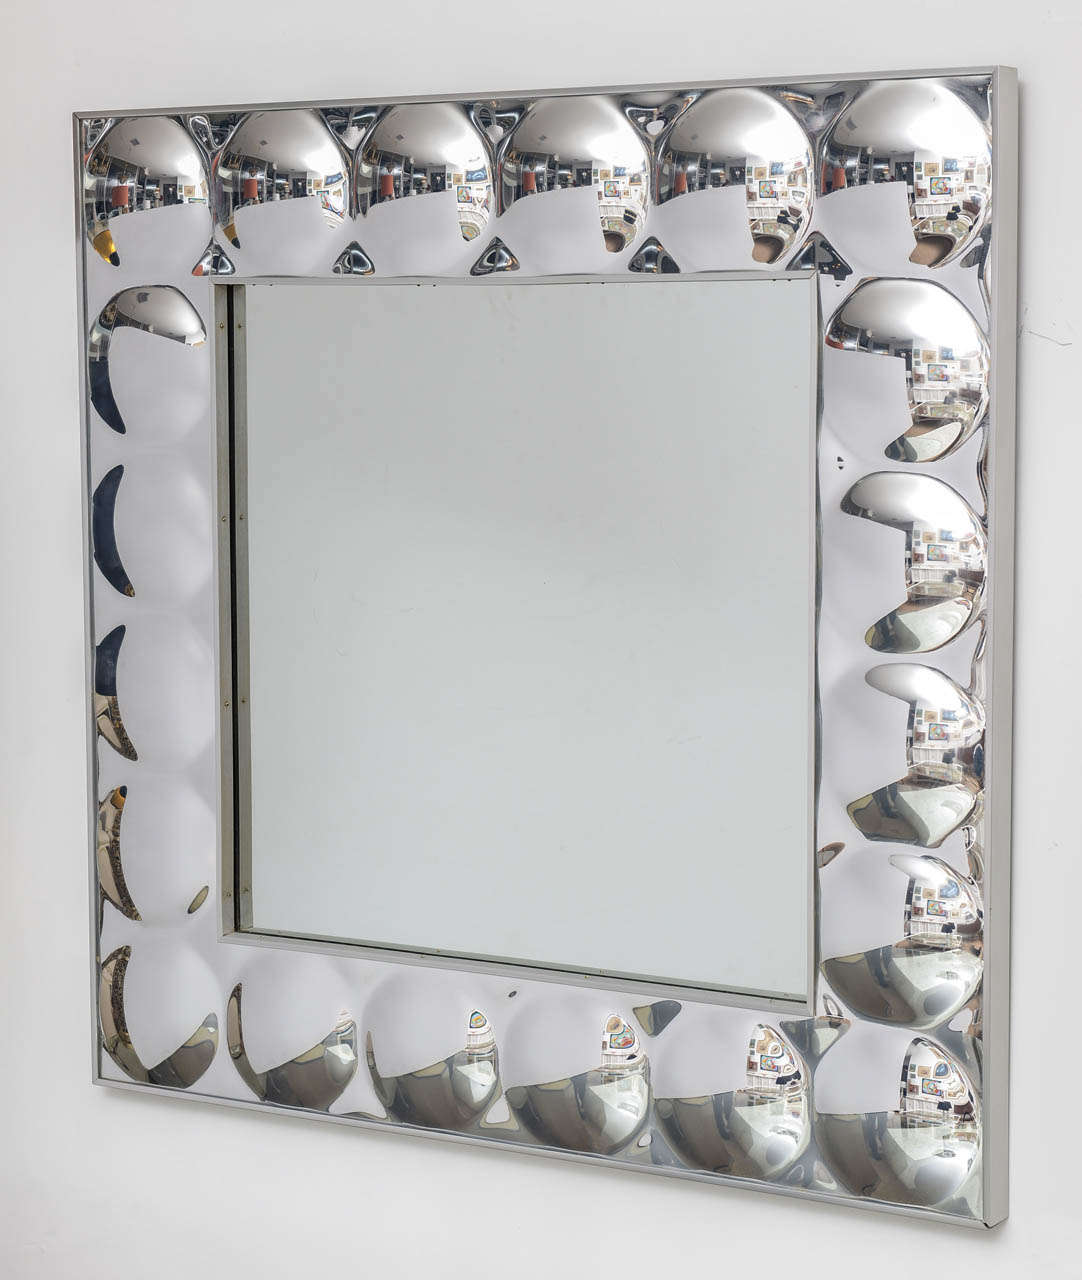 Square mirror with silver acrylic bubble surround followed by a brushed aluminum exterior frame.